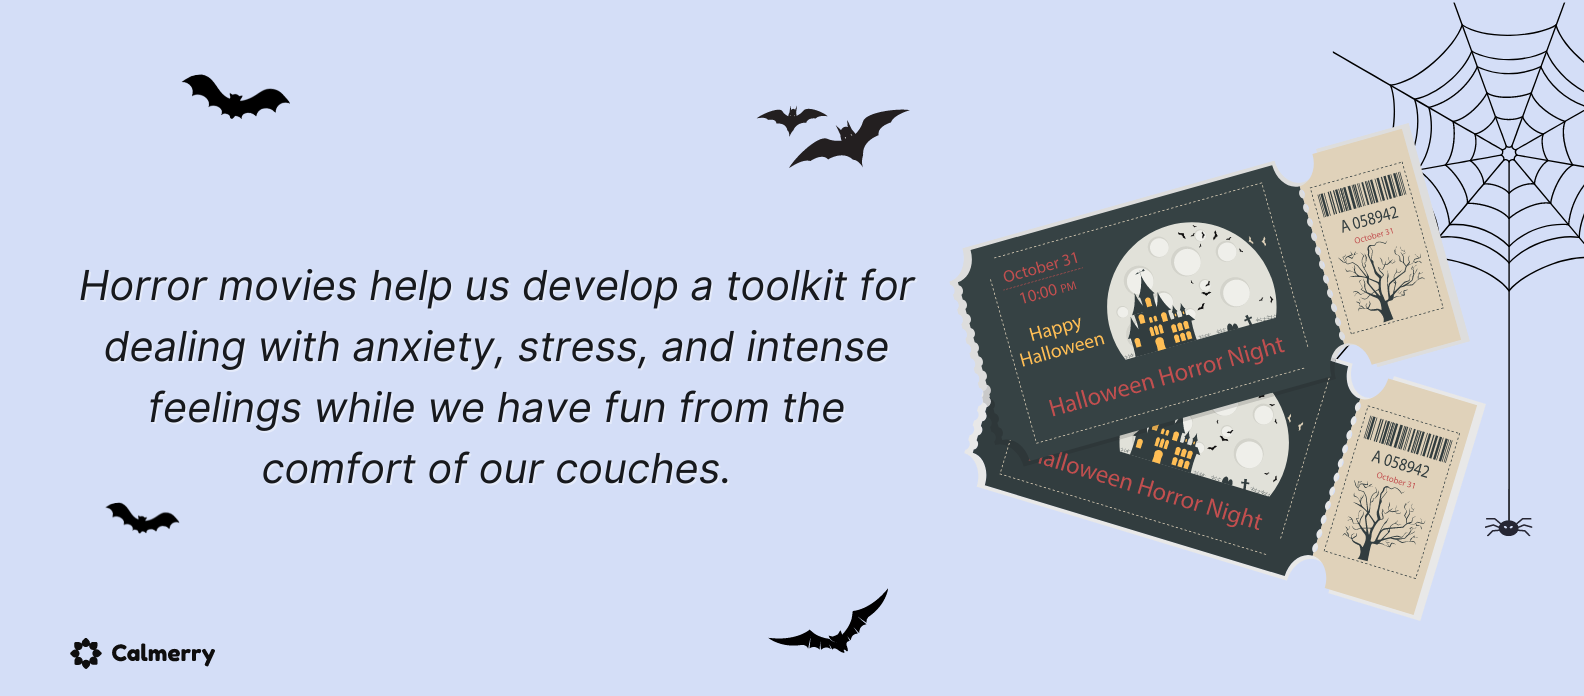 Horror movies help us develop a toolkit for dealing with anxiety, stress, and intense feelings while we have fun from the comfort of our coaches.